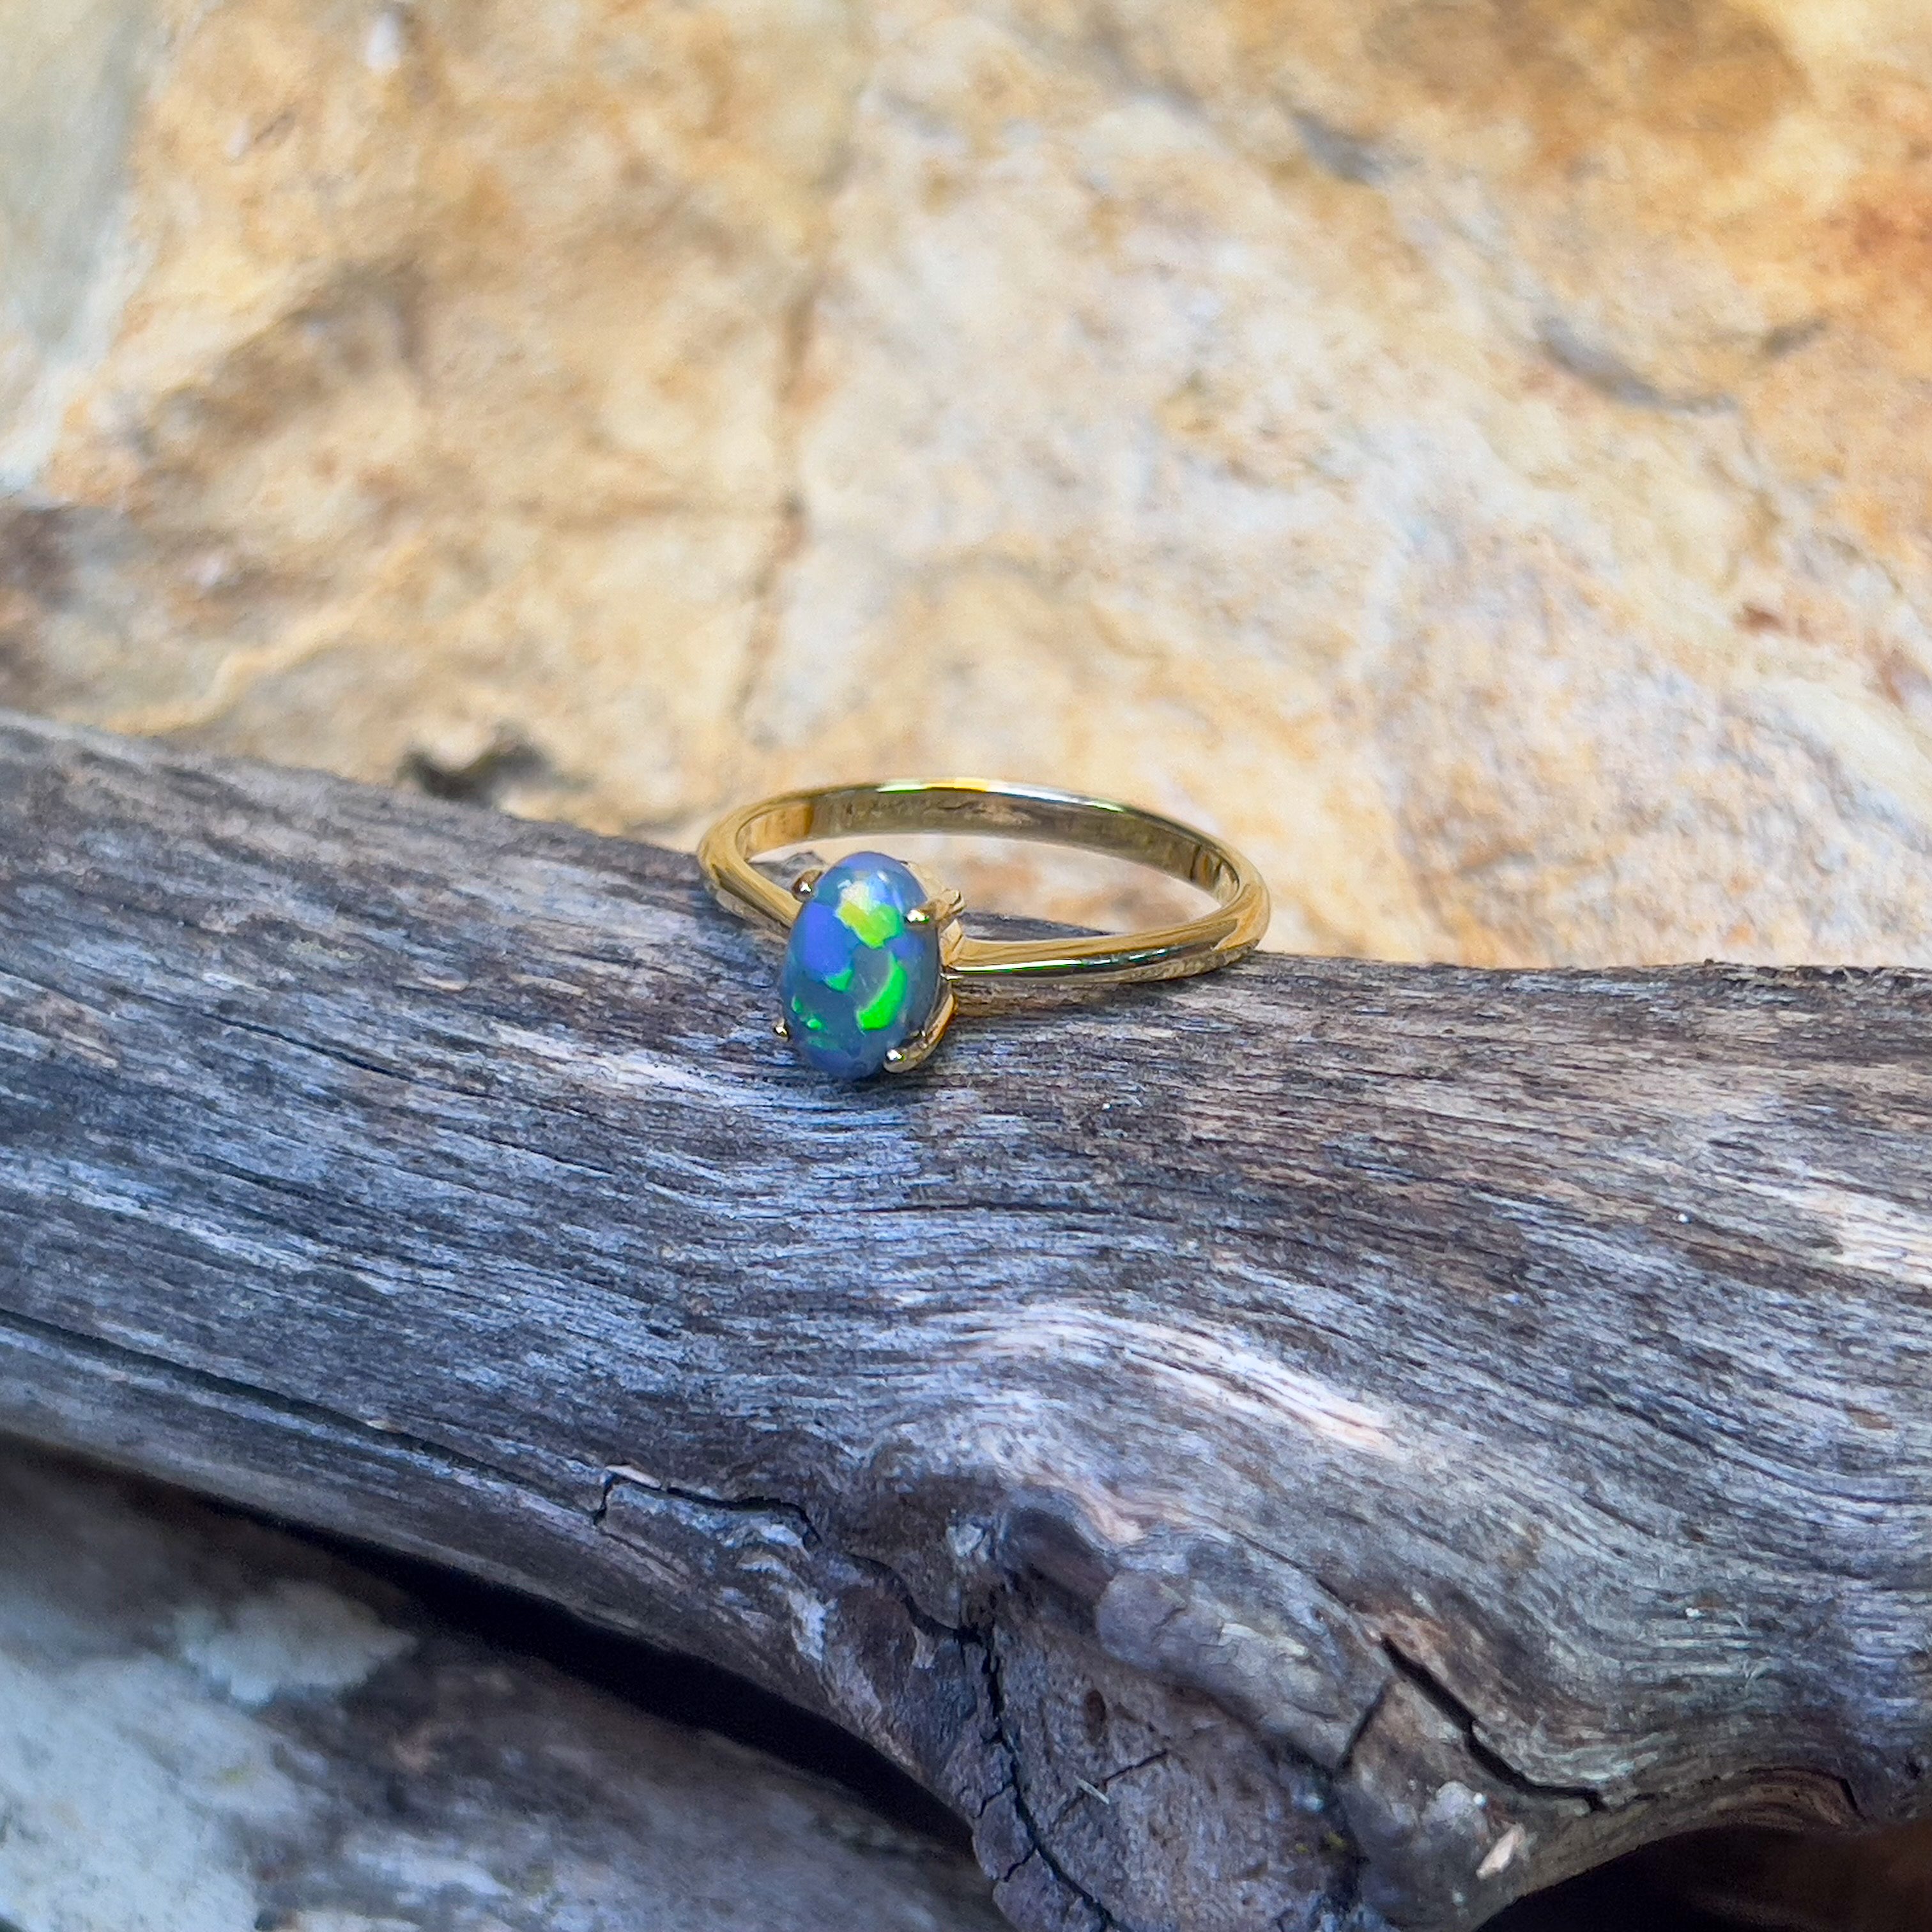 18kt Yellow Gold solitaire ring set with one 0.65ct Black Opal - Masterpiece Jewellery Opal & Gems Sydney Australia | Online Shop